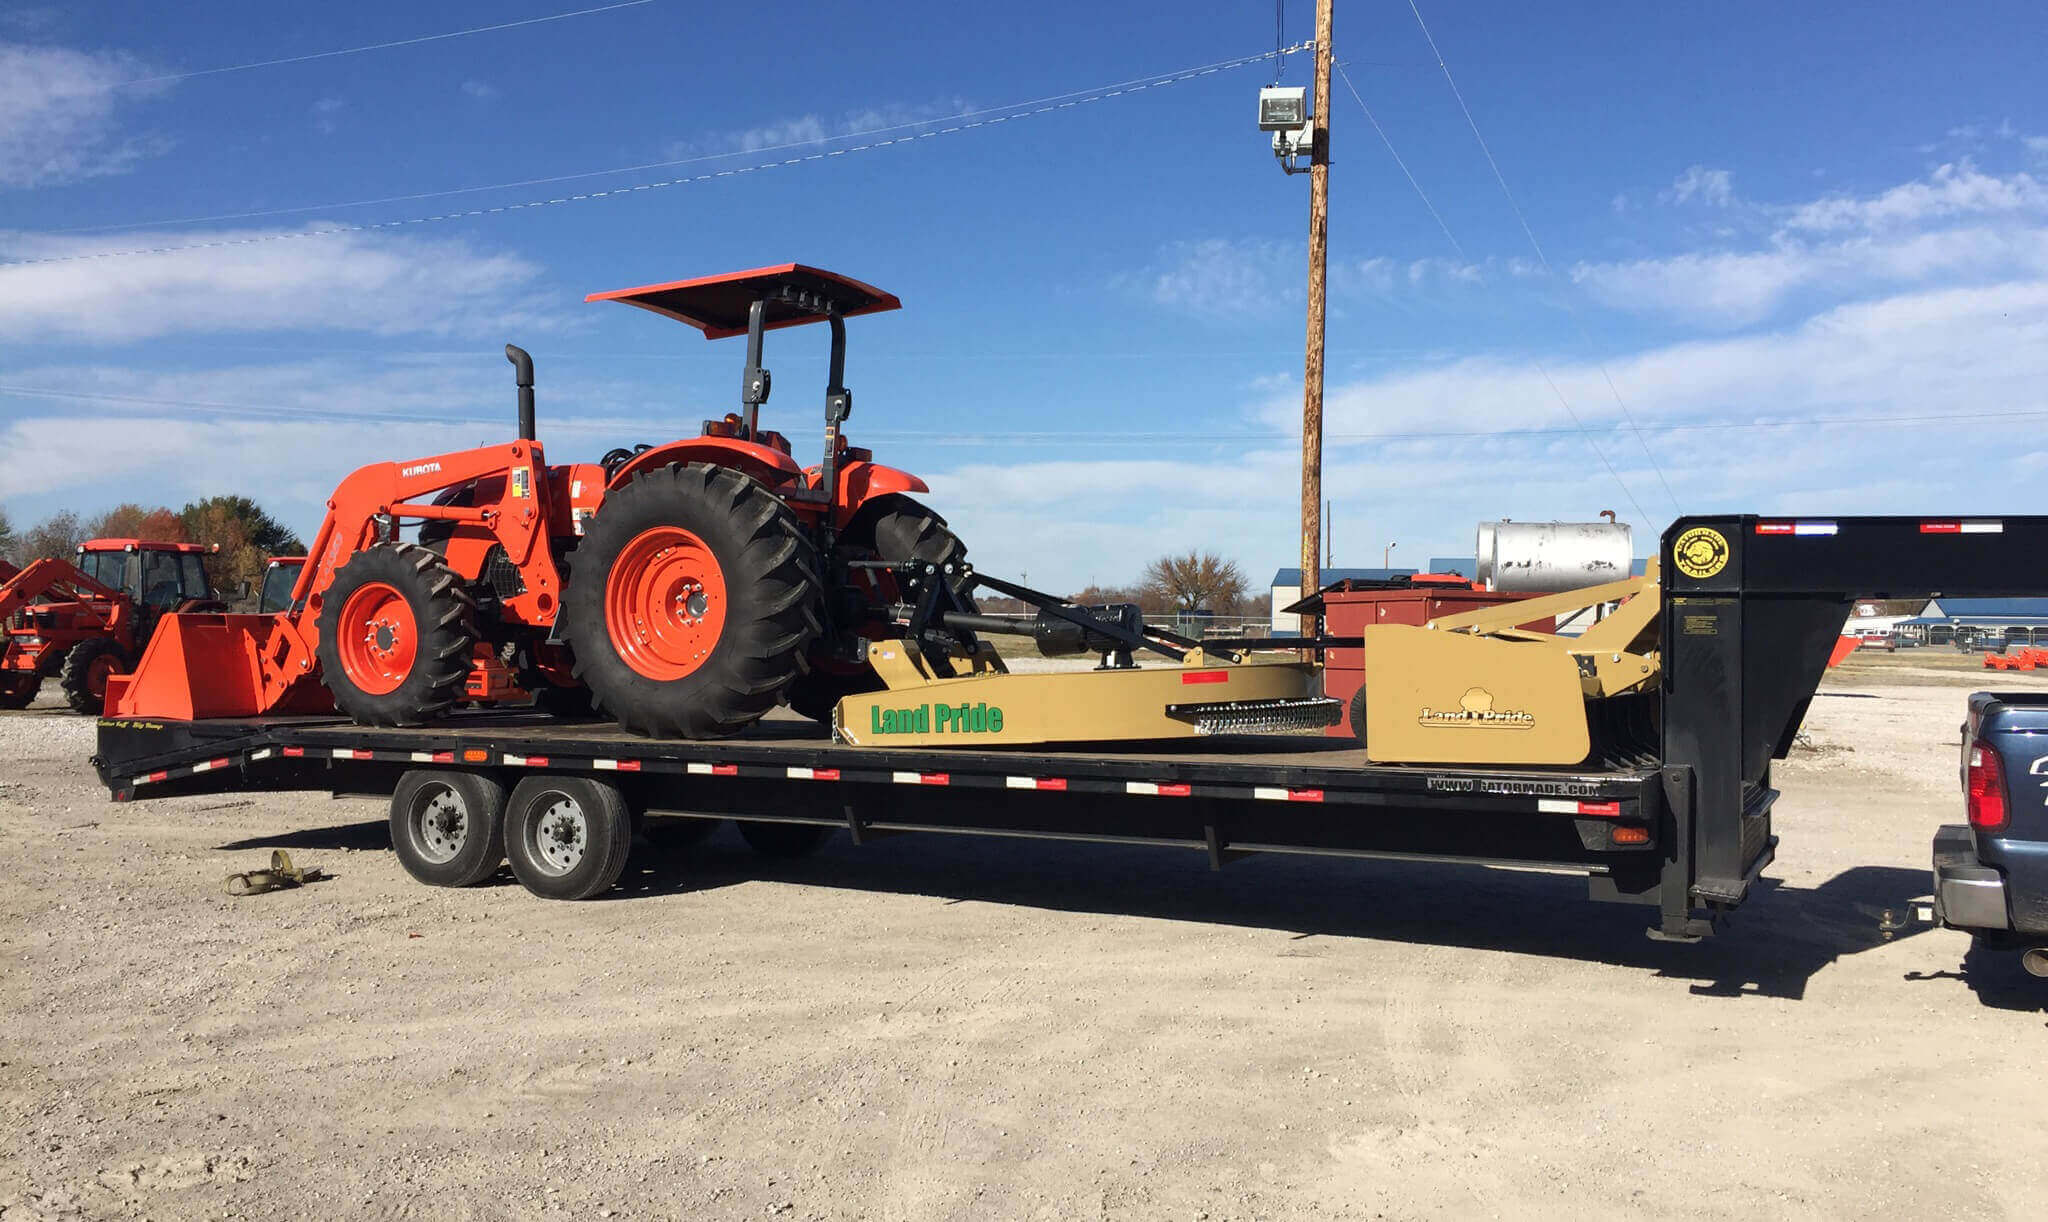 Transporting Kubota L3000DT Loader with Land Pride Attachments